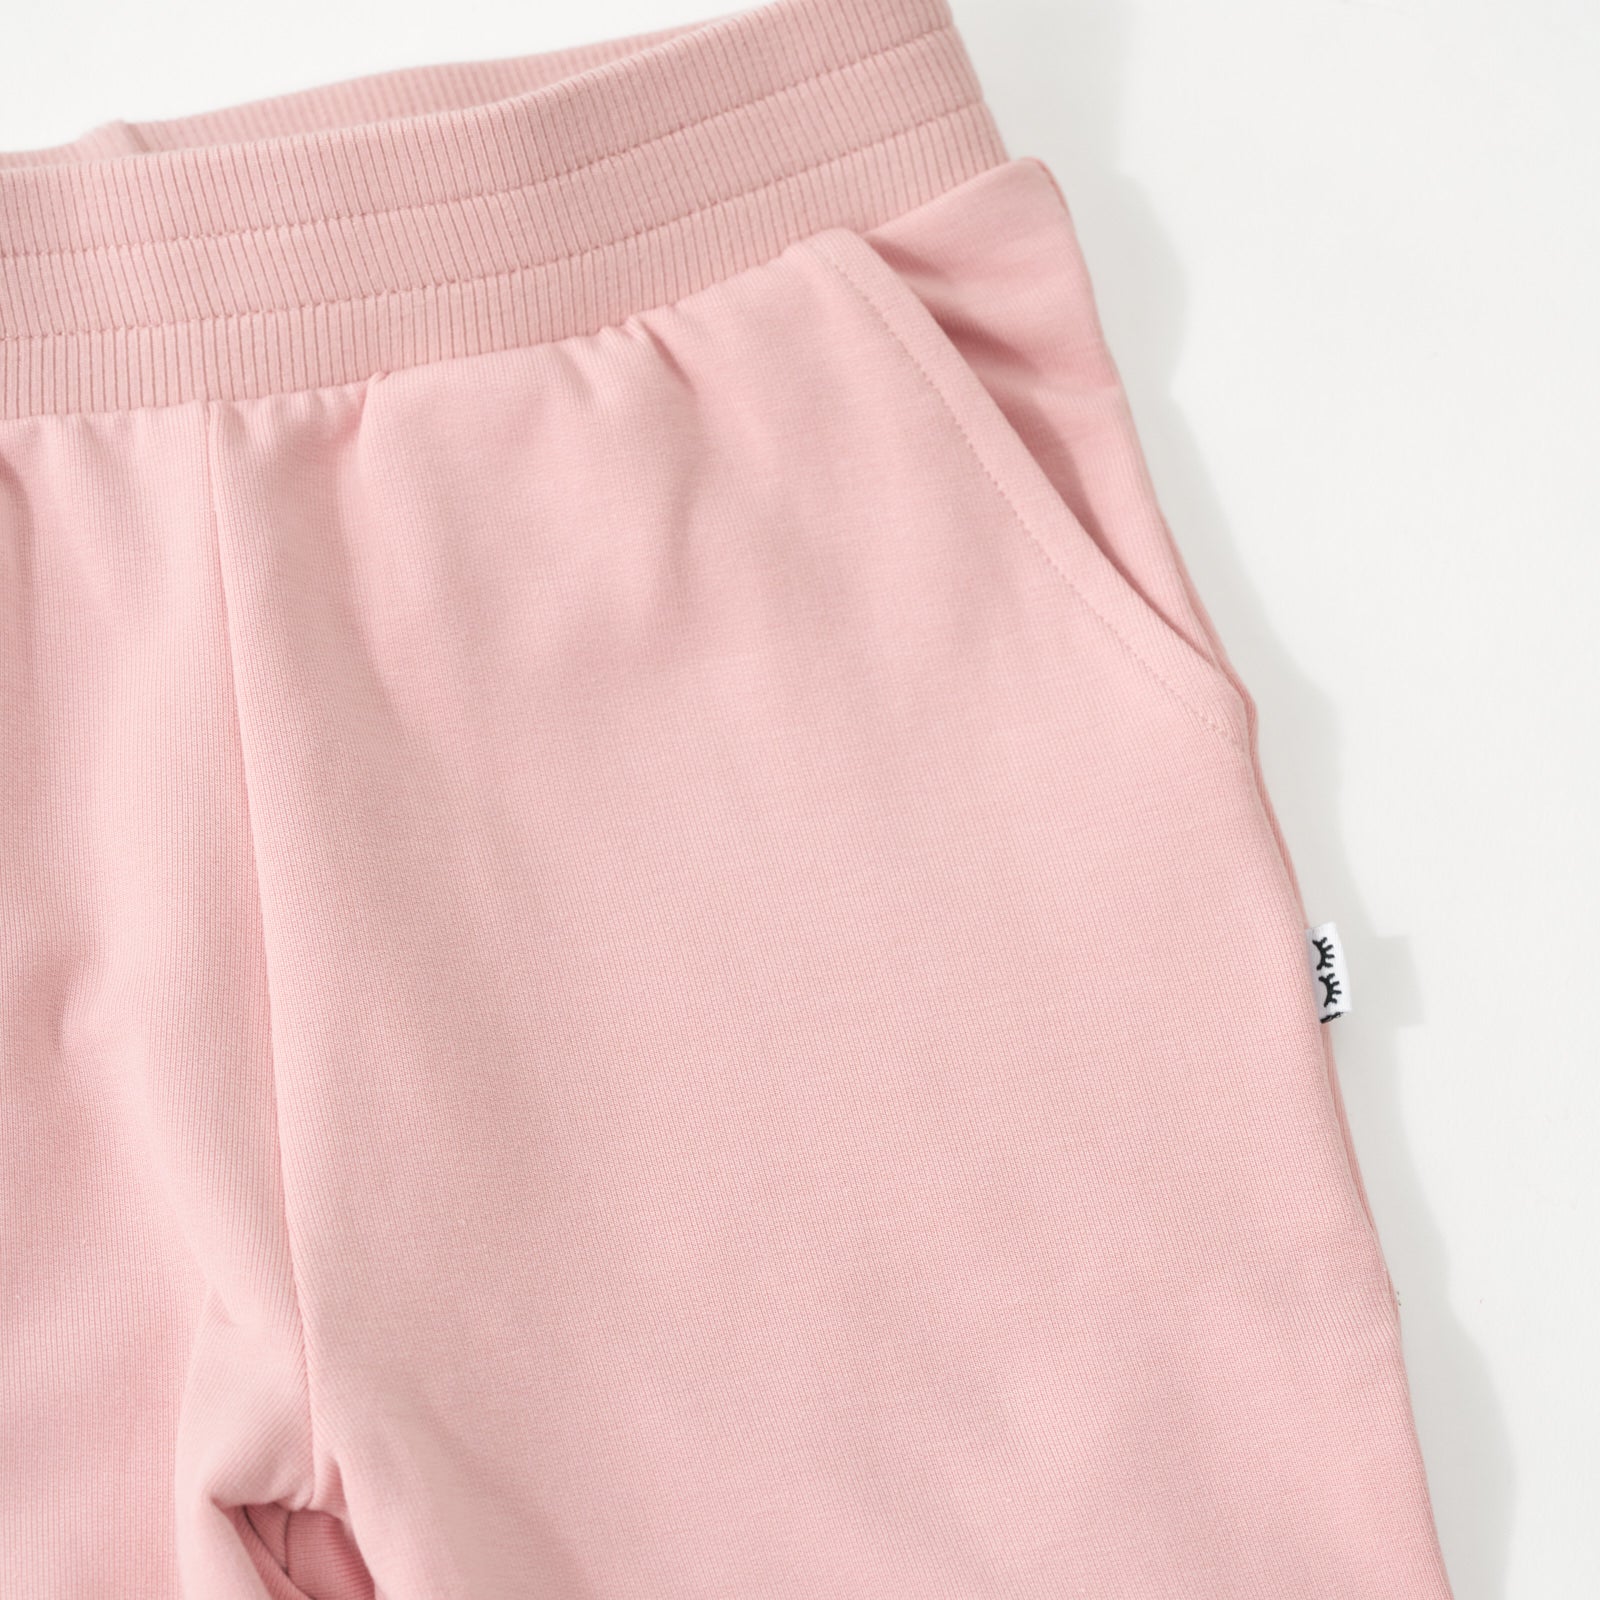 Alternative image of the close up image of the waist and pocket detail on the Mauve Blush Jogger